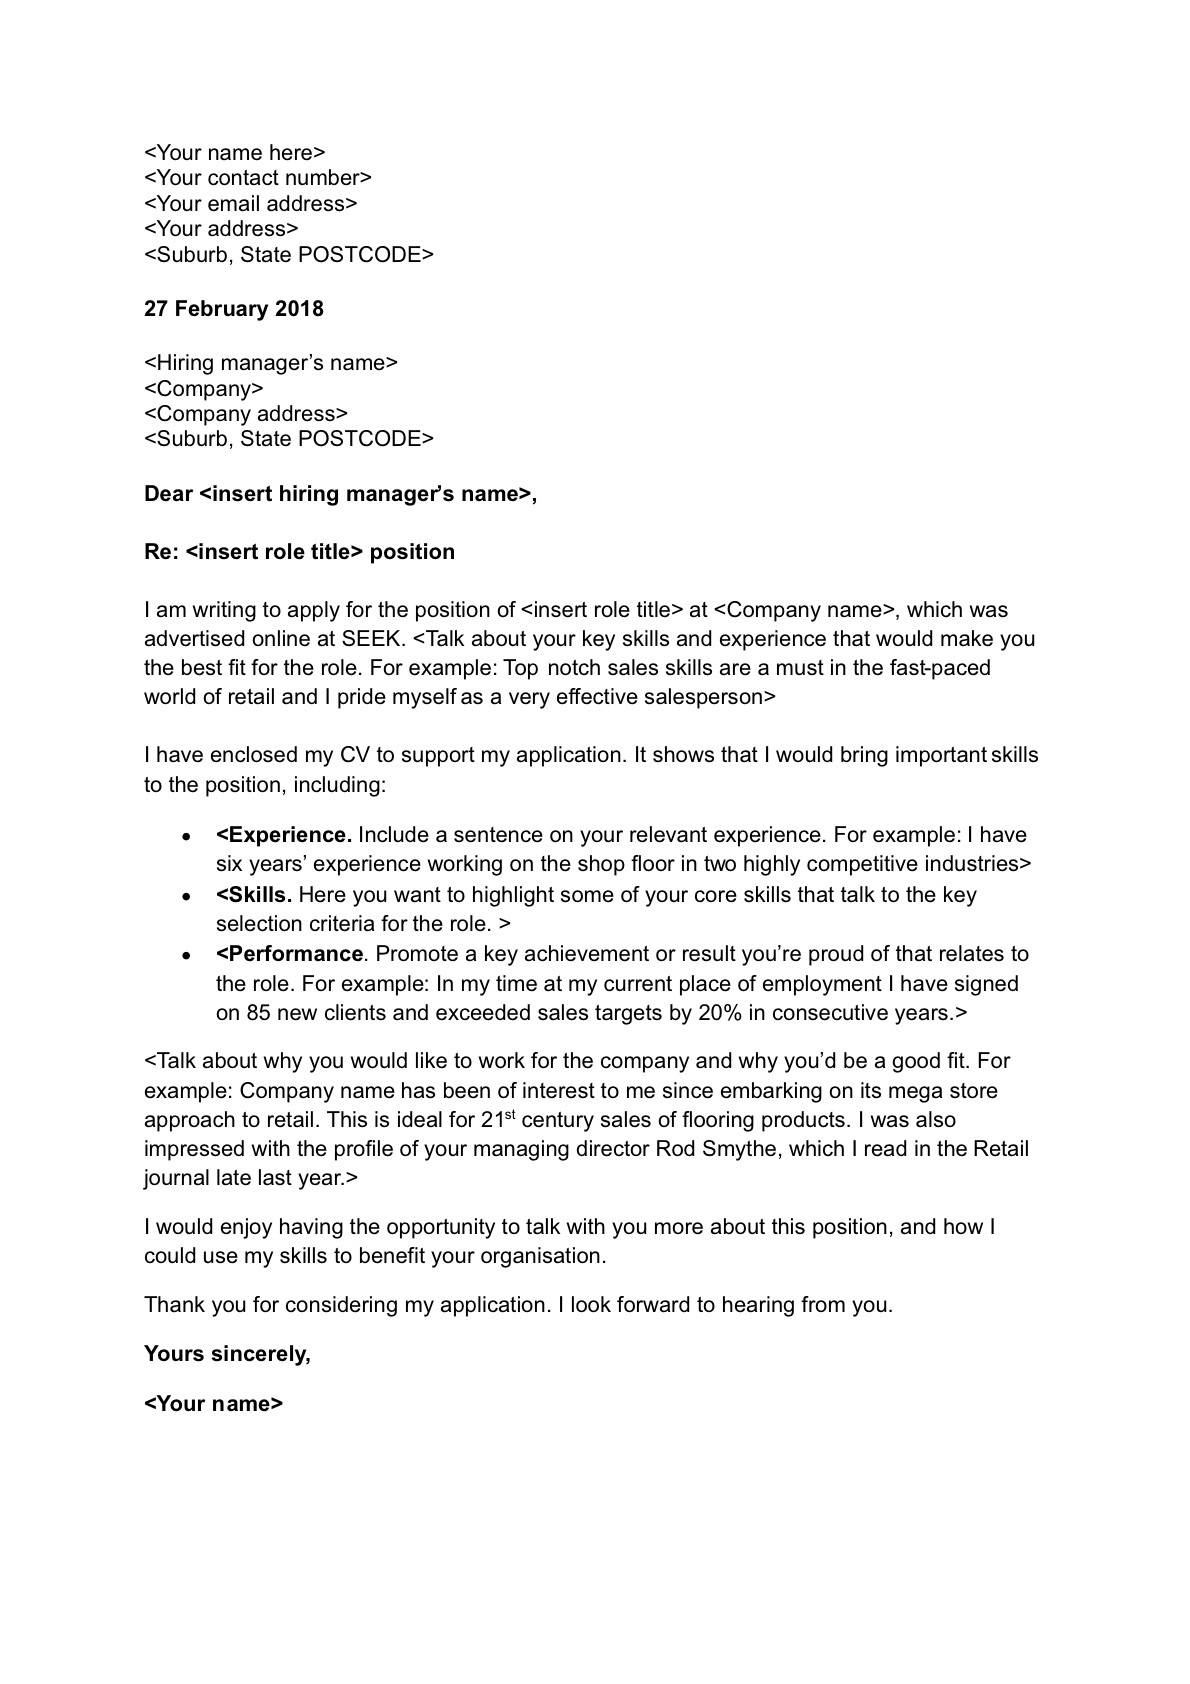 Resume Cover Letter Examples For Customer Service from seekconz.corewebdna.net.au